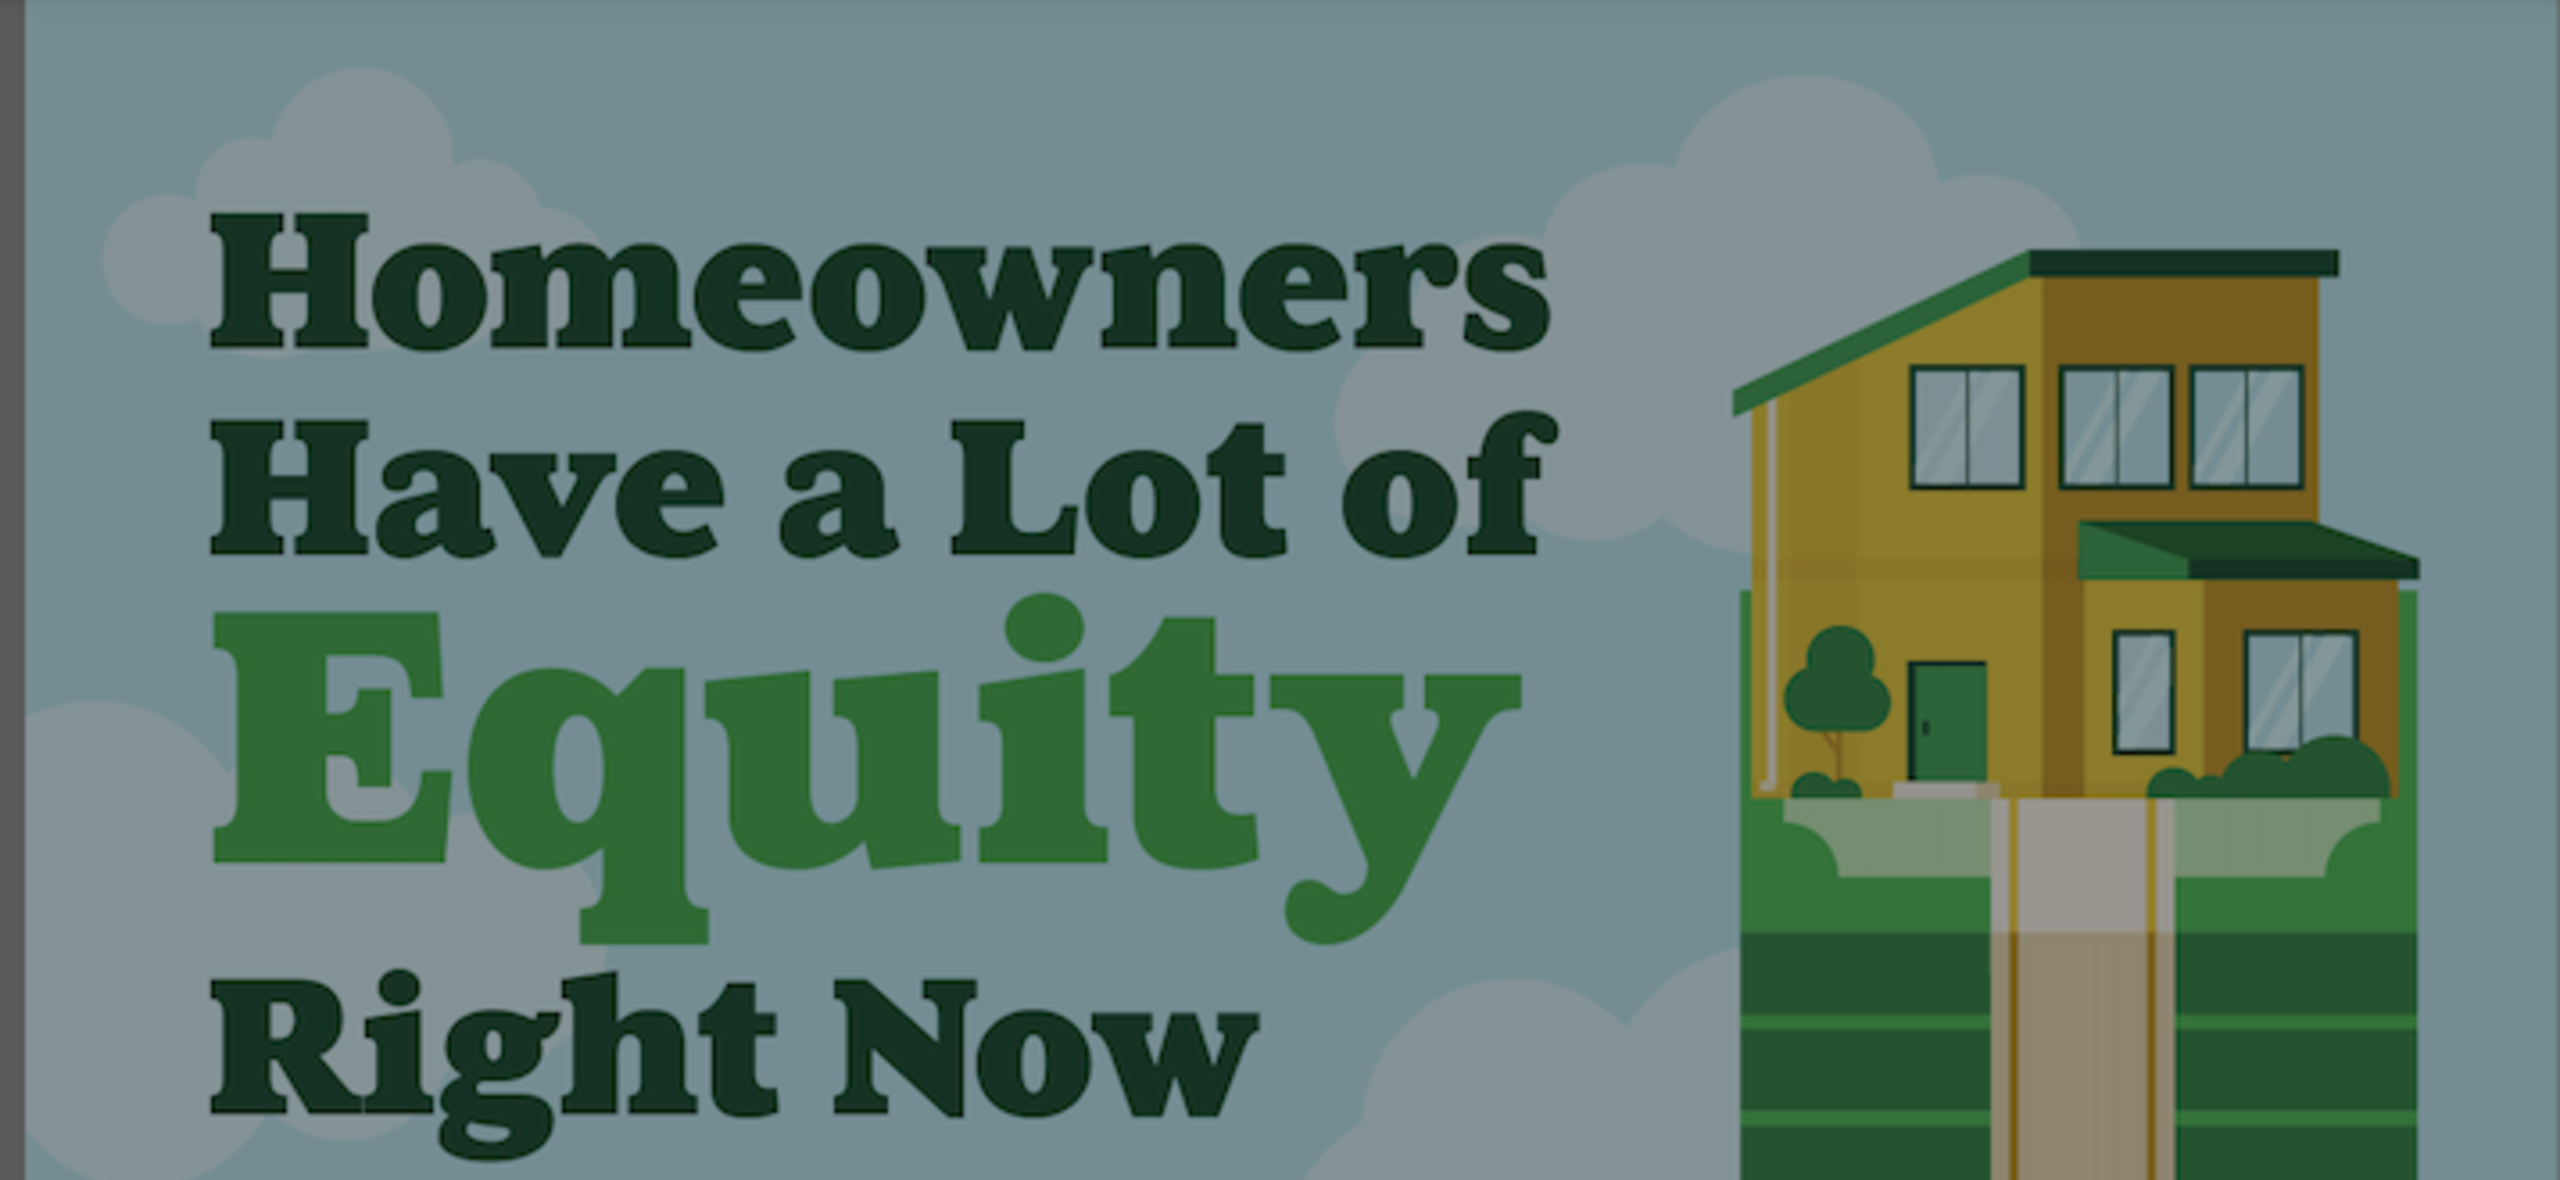 Homeowners Have a Lot of Equity Right Now